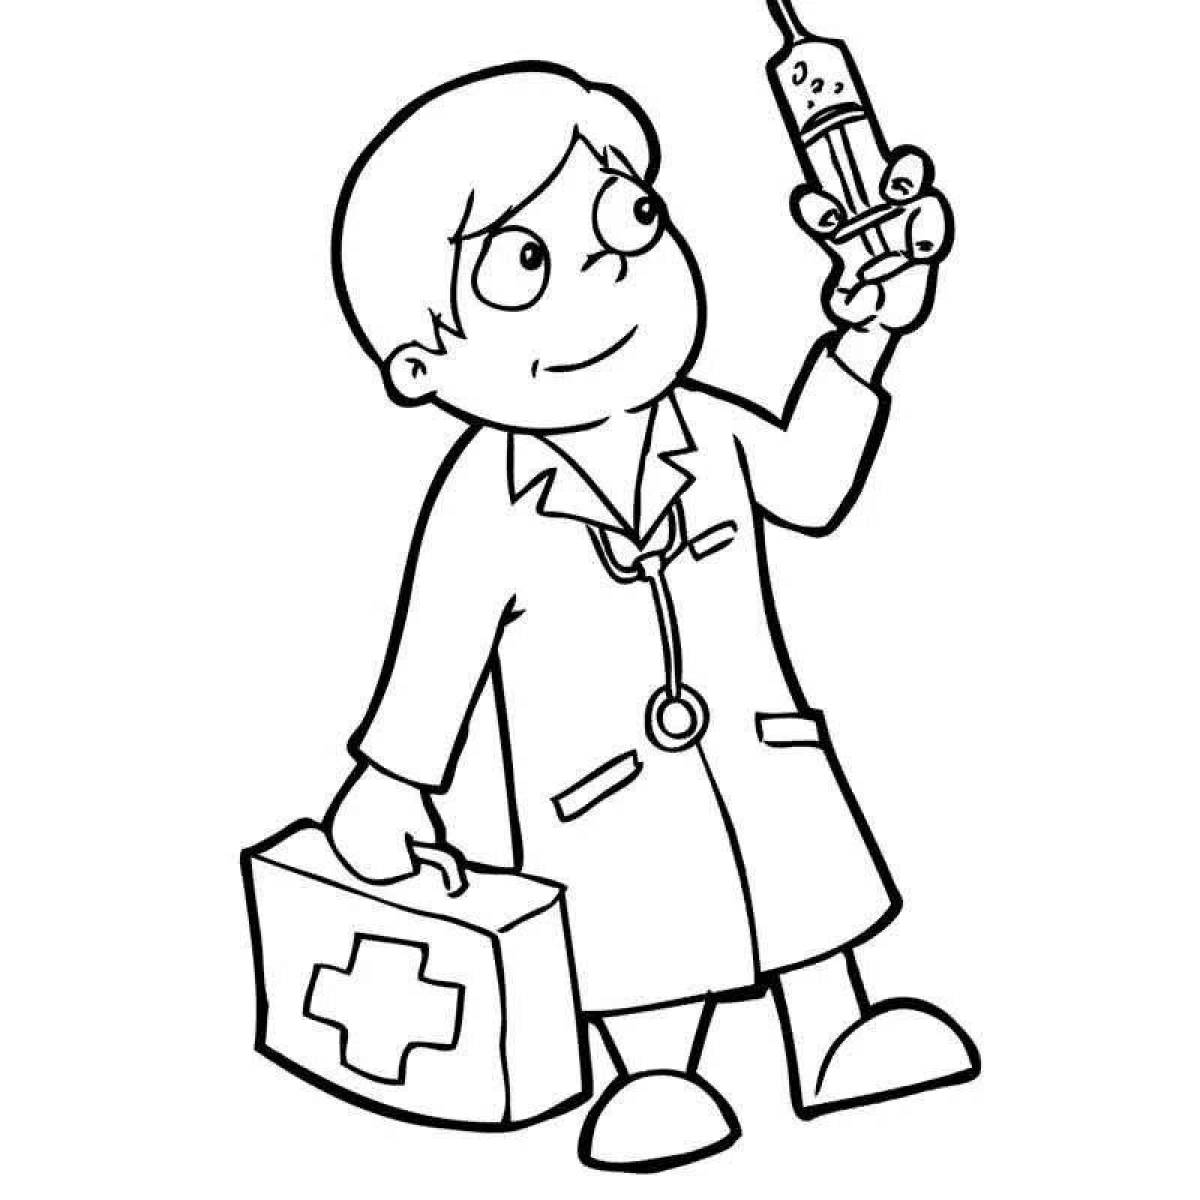 Entertaining doctor figure coloring page